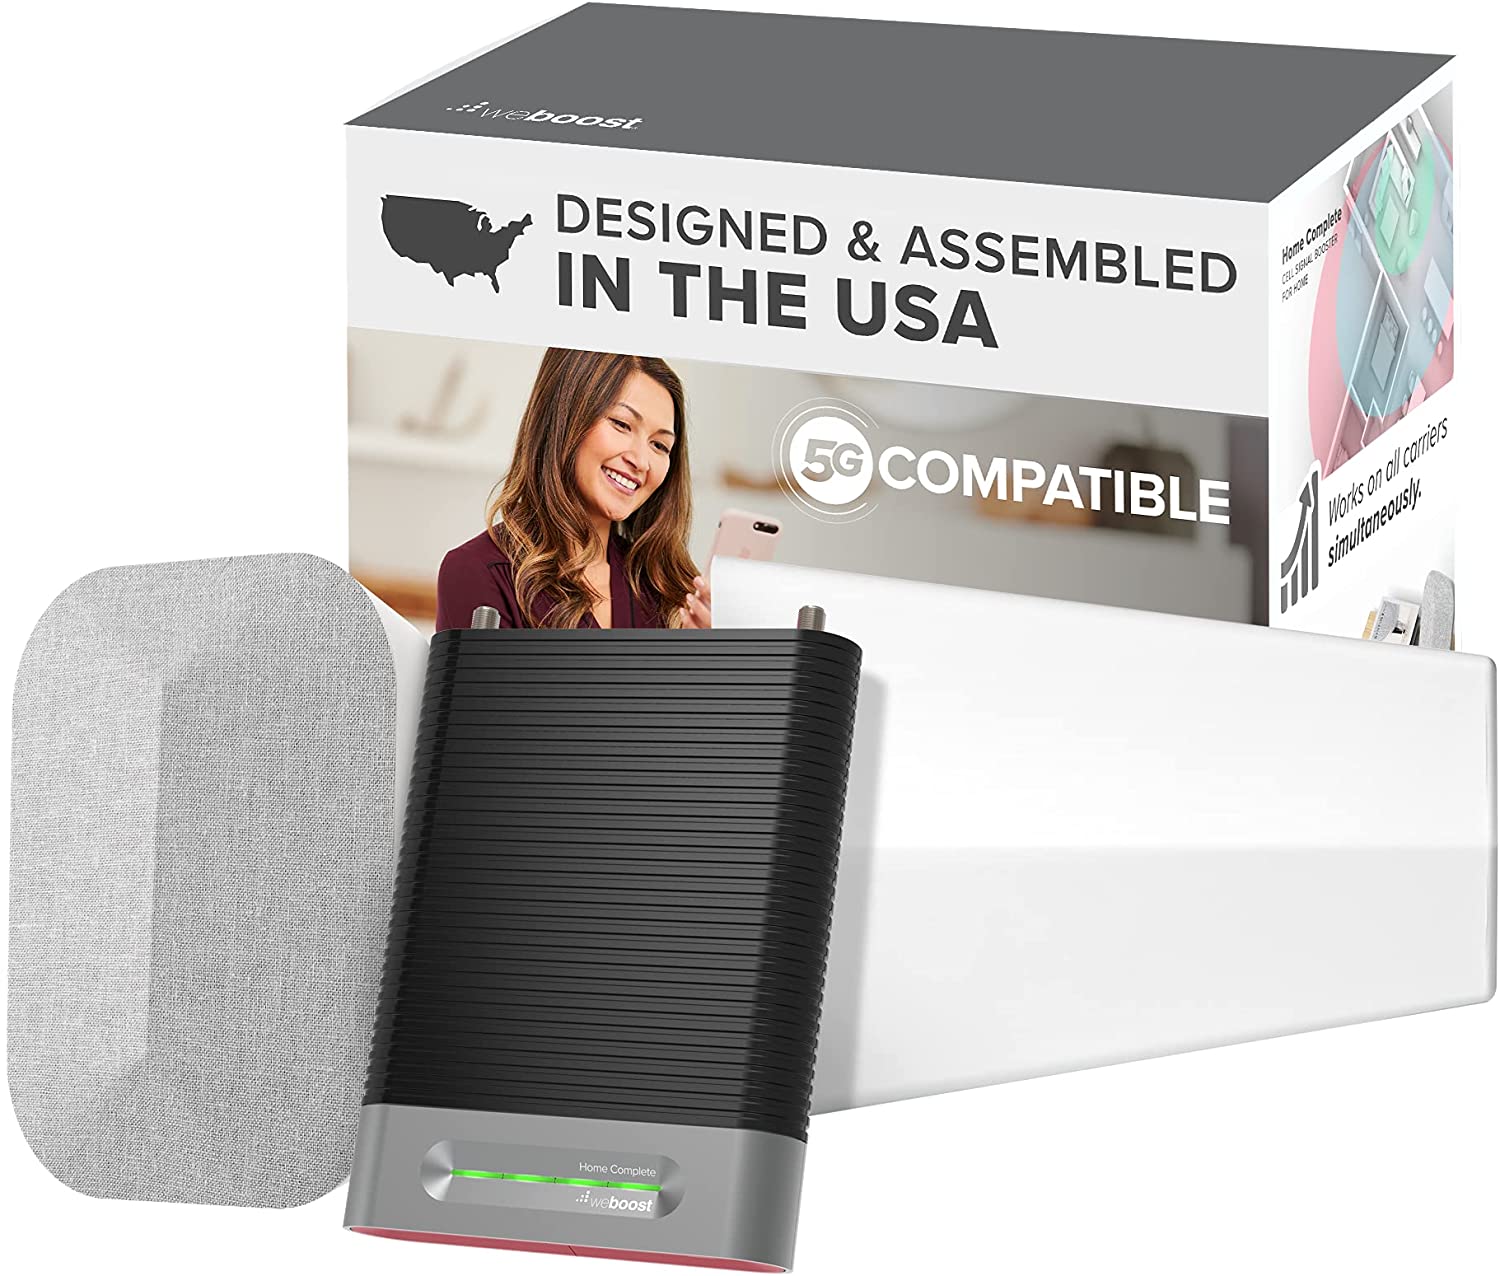 weBoost Home Complete (650145) Cell Phone Signal Booster Kit for Home & Small Business | Works on Every Network & All Candian Carriers at Once | 5G Compatible | Designed & Assembled in The USA